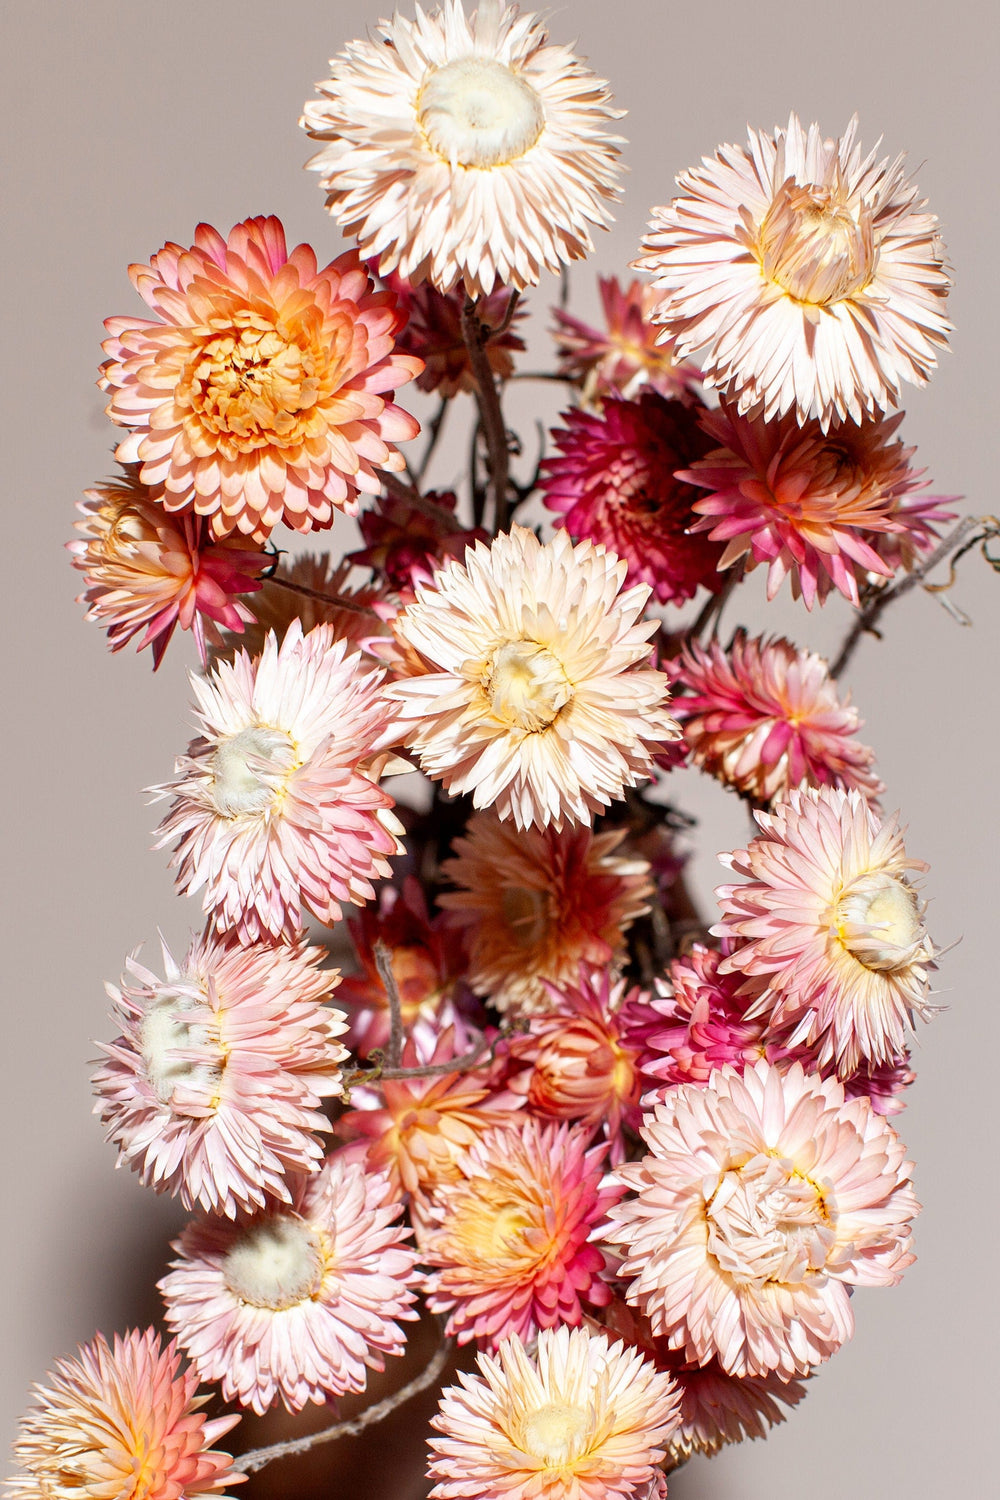 Idlewild Floral Co. Bunches Pink Strawflower